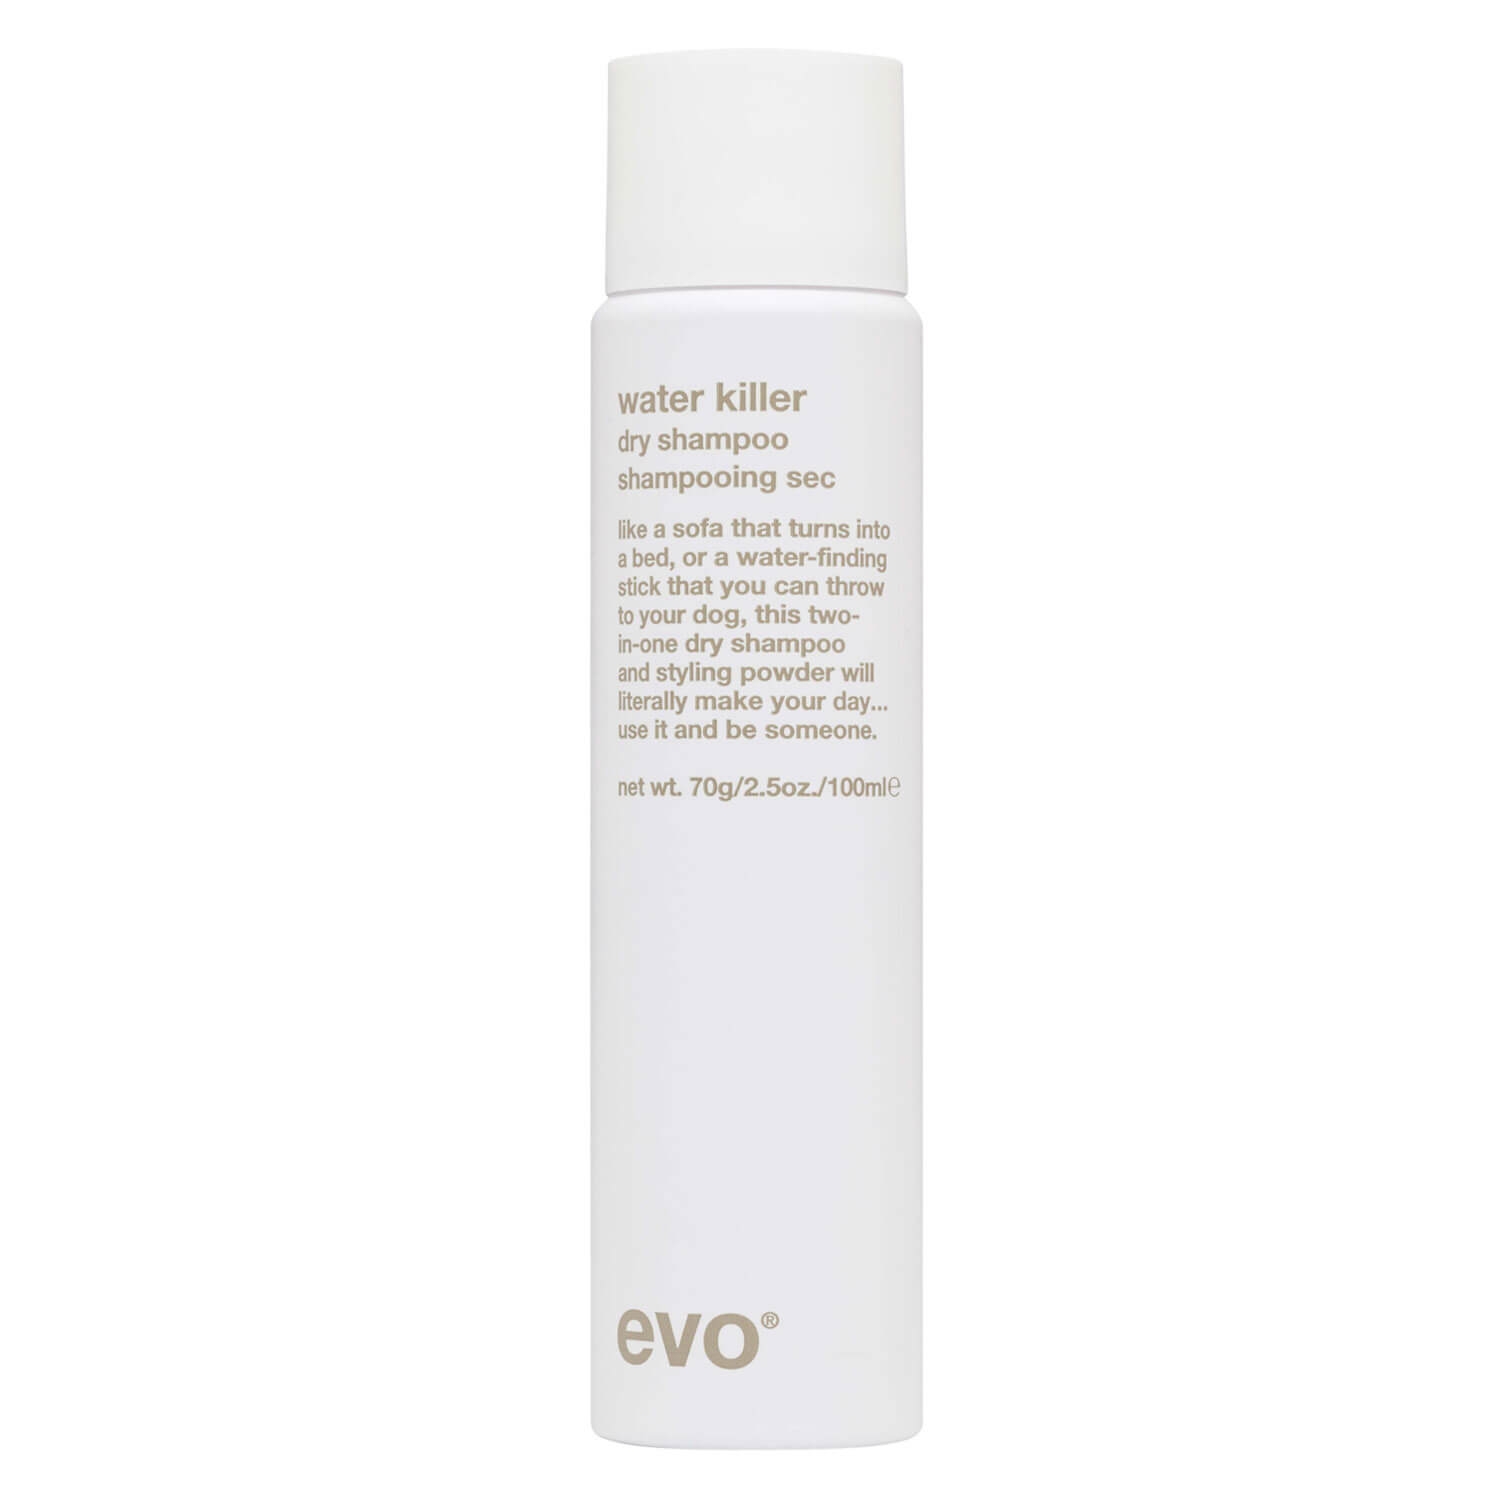 Product image from evo style - water killer dry shampoo